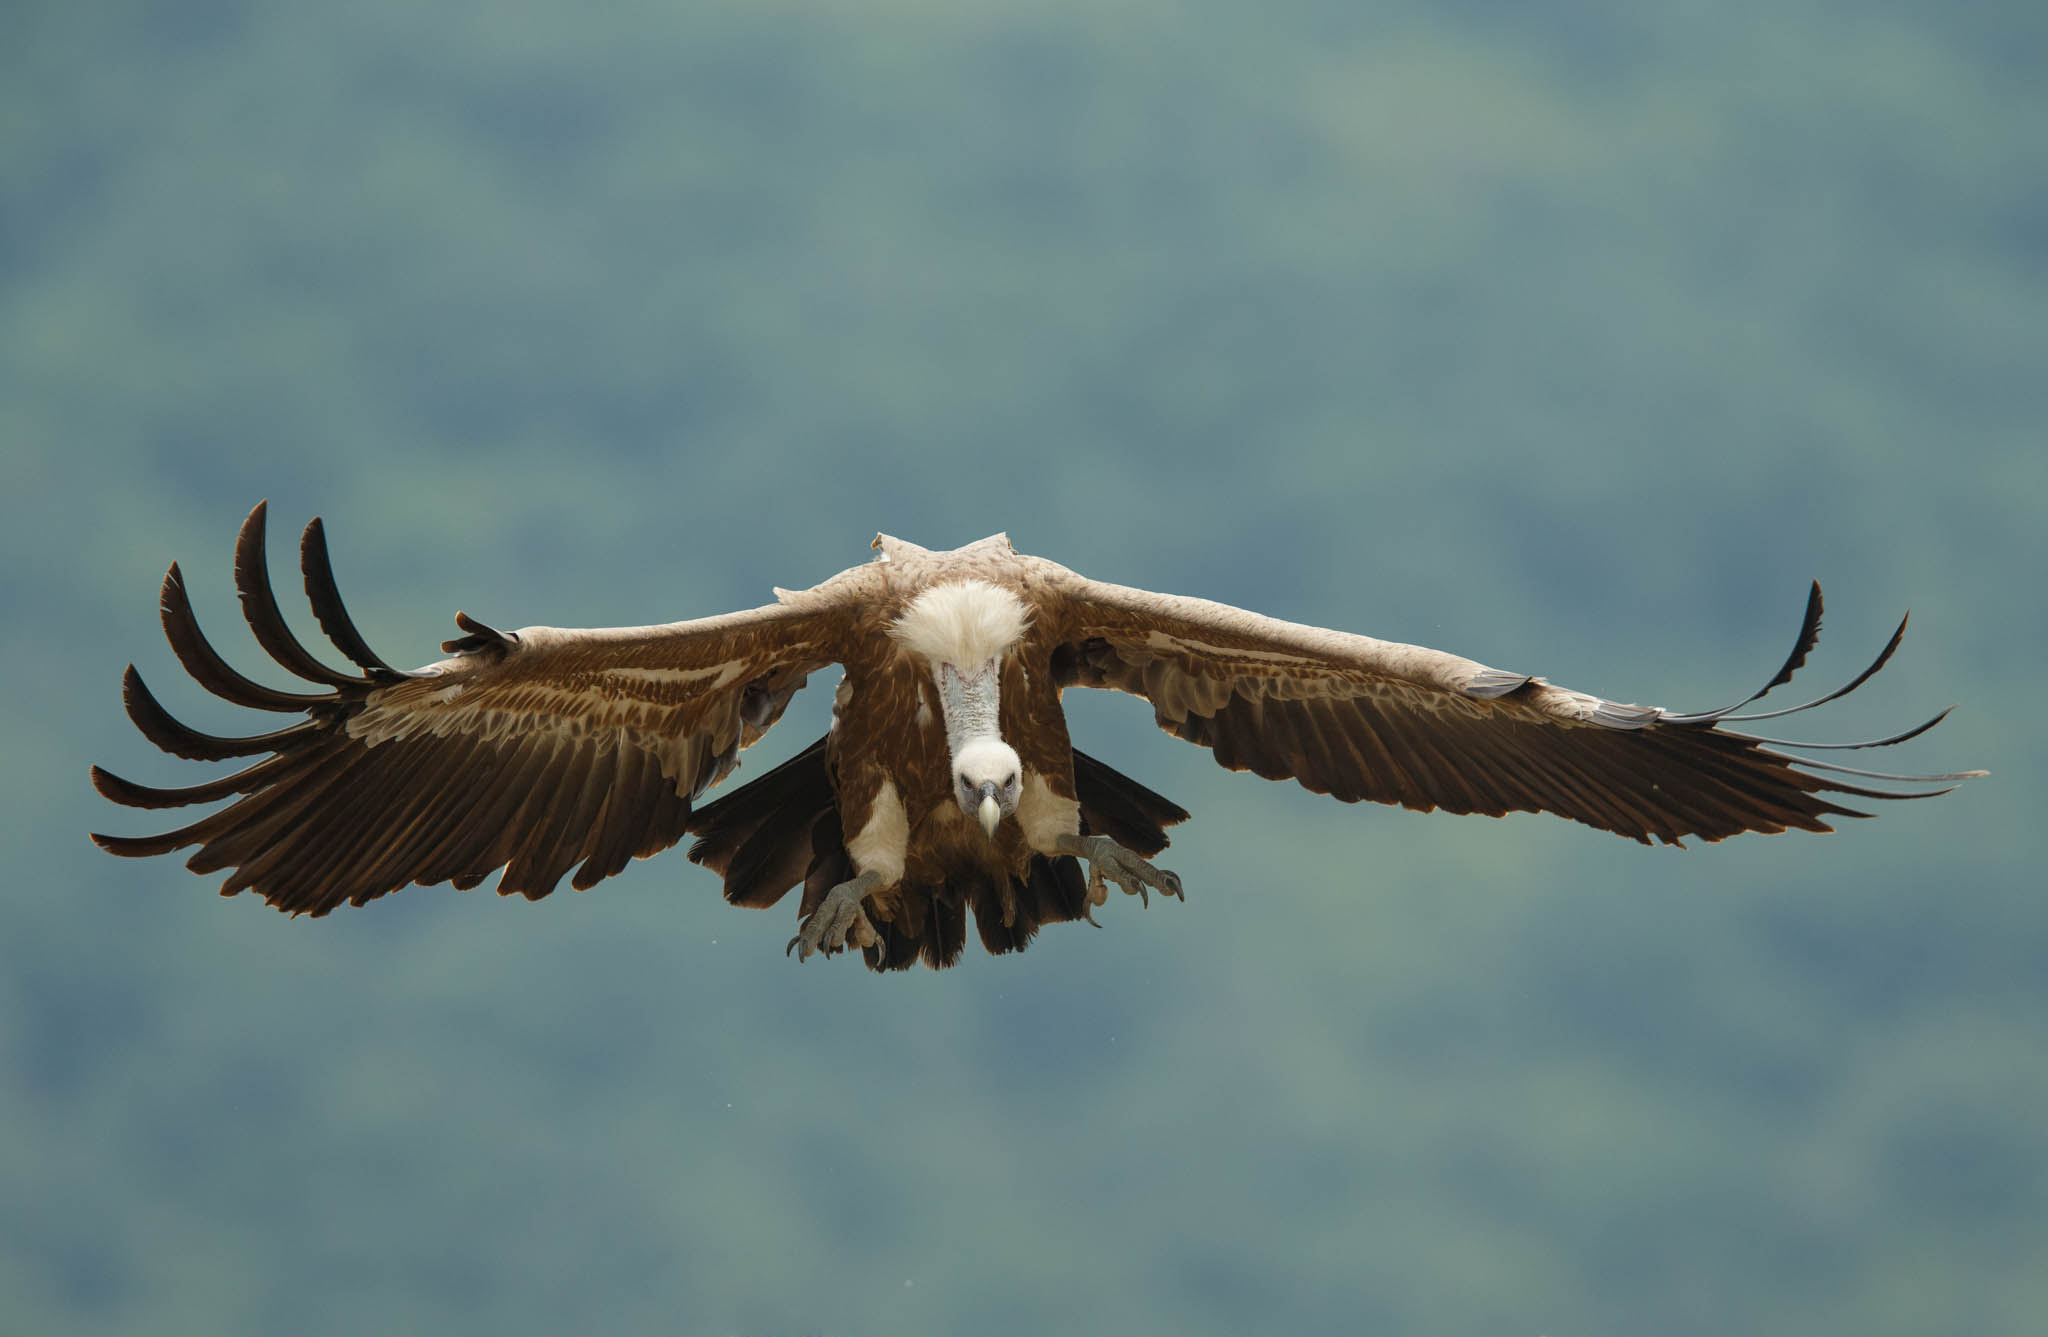 The number of griffon vulture pairs in the Rhodope Mountains rewilding area in Bulgaria has now reached 95.